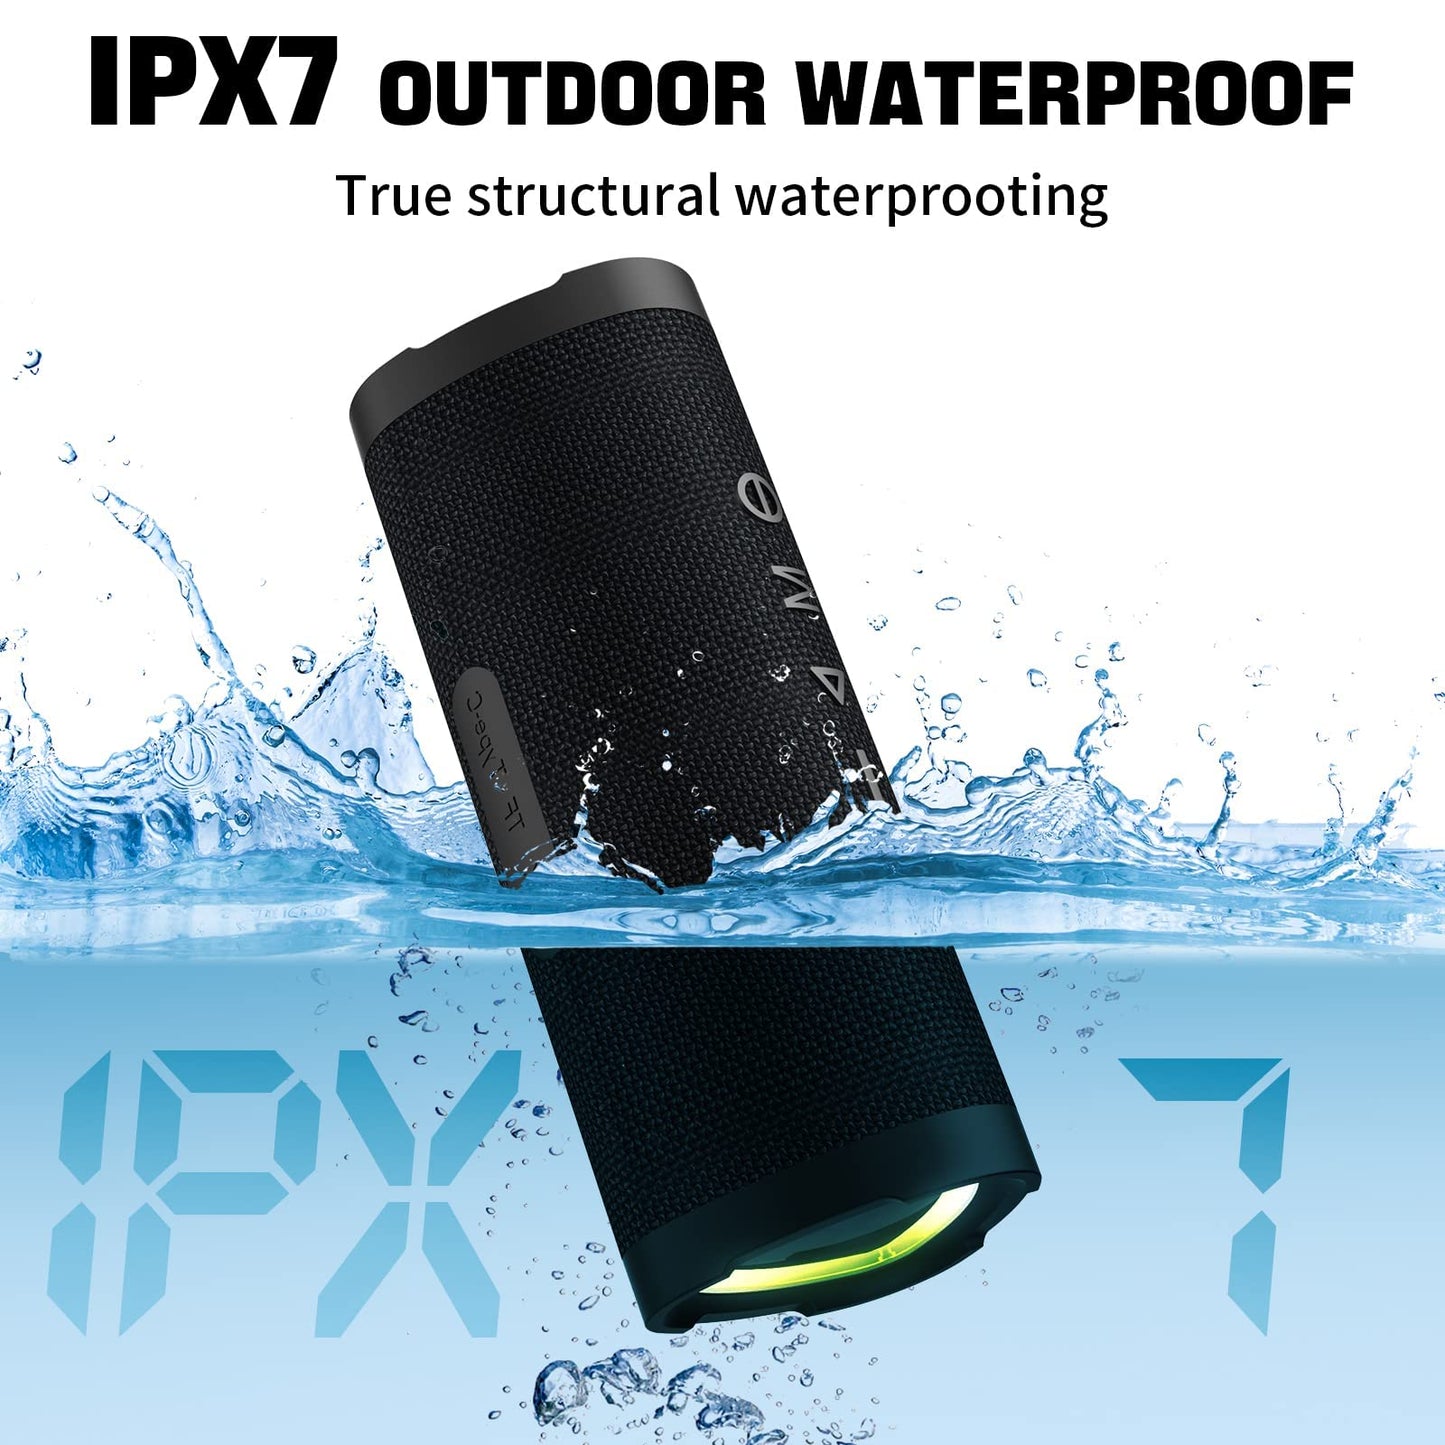 Bluetooth Speakers, Vanzon Wireless Bluetooth Speaker with 24W Stereo Sound,24H Playtime, Bluetooth 5.0, TWS, RGB Lights, IPX7 Waterproof Portable Speaker for Beach, Party,Travel